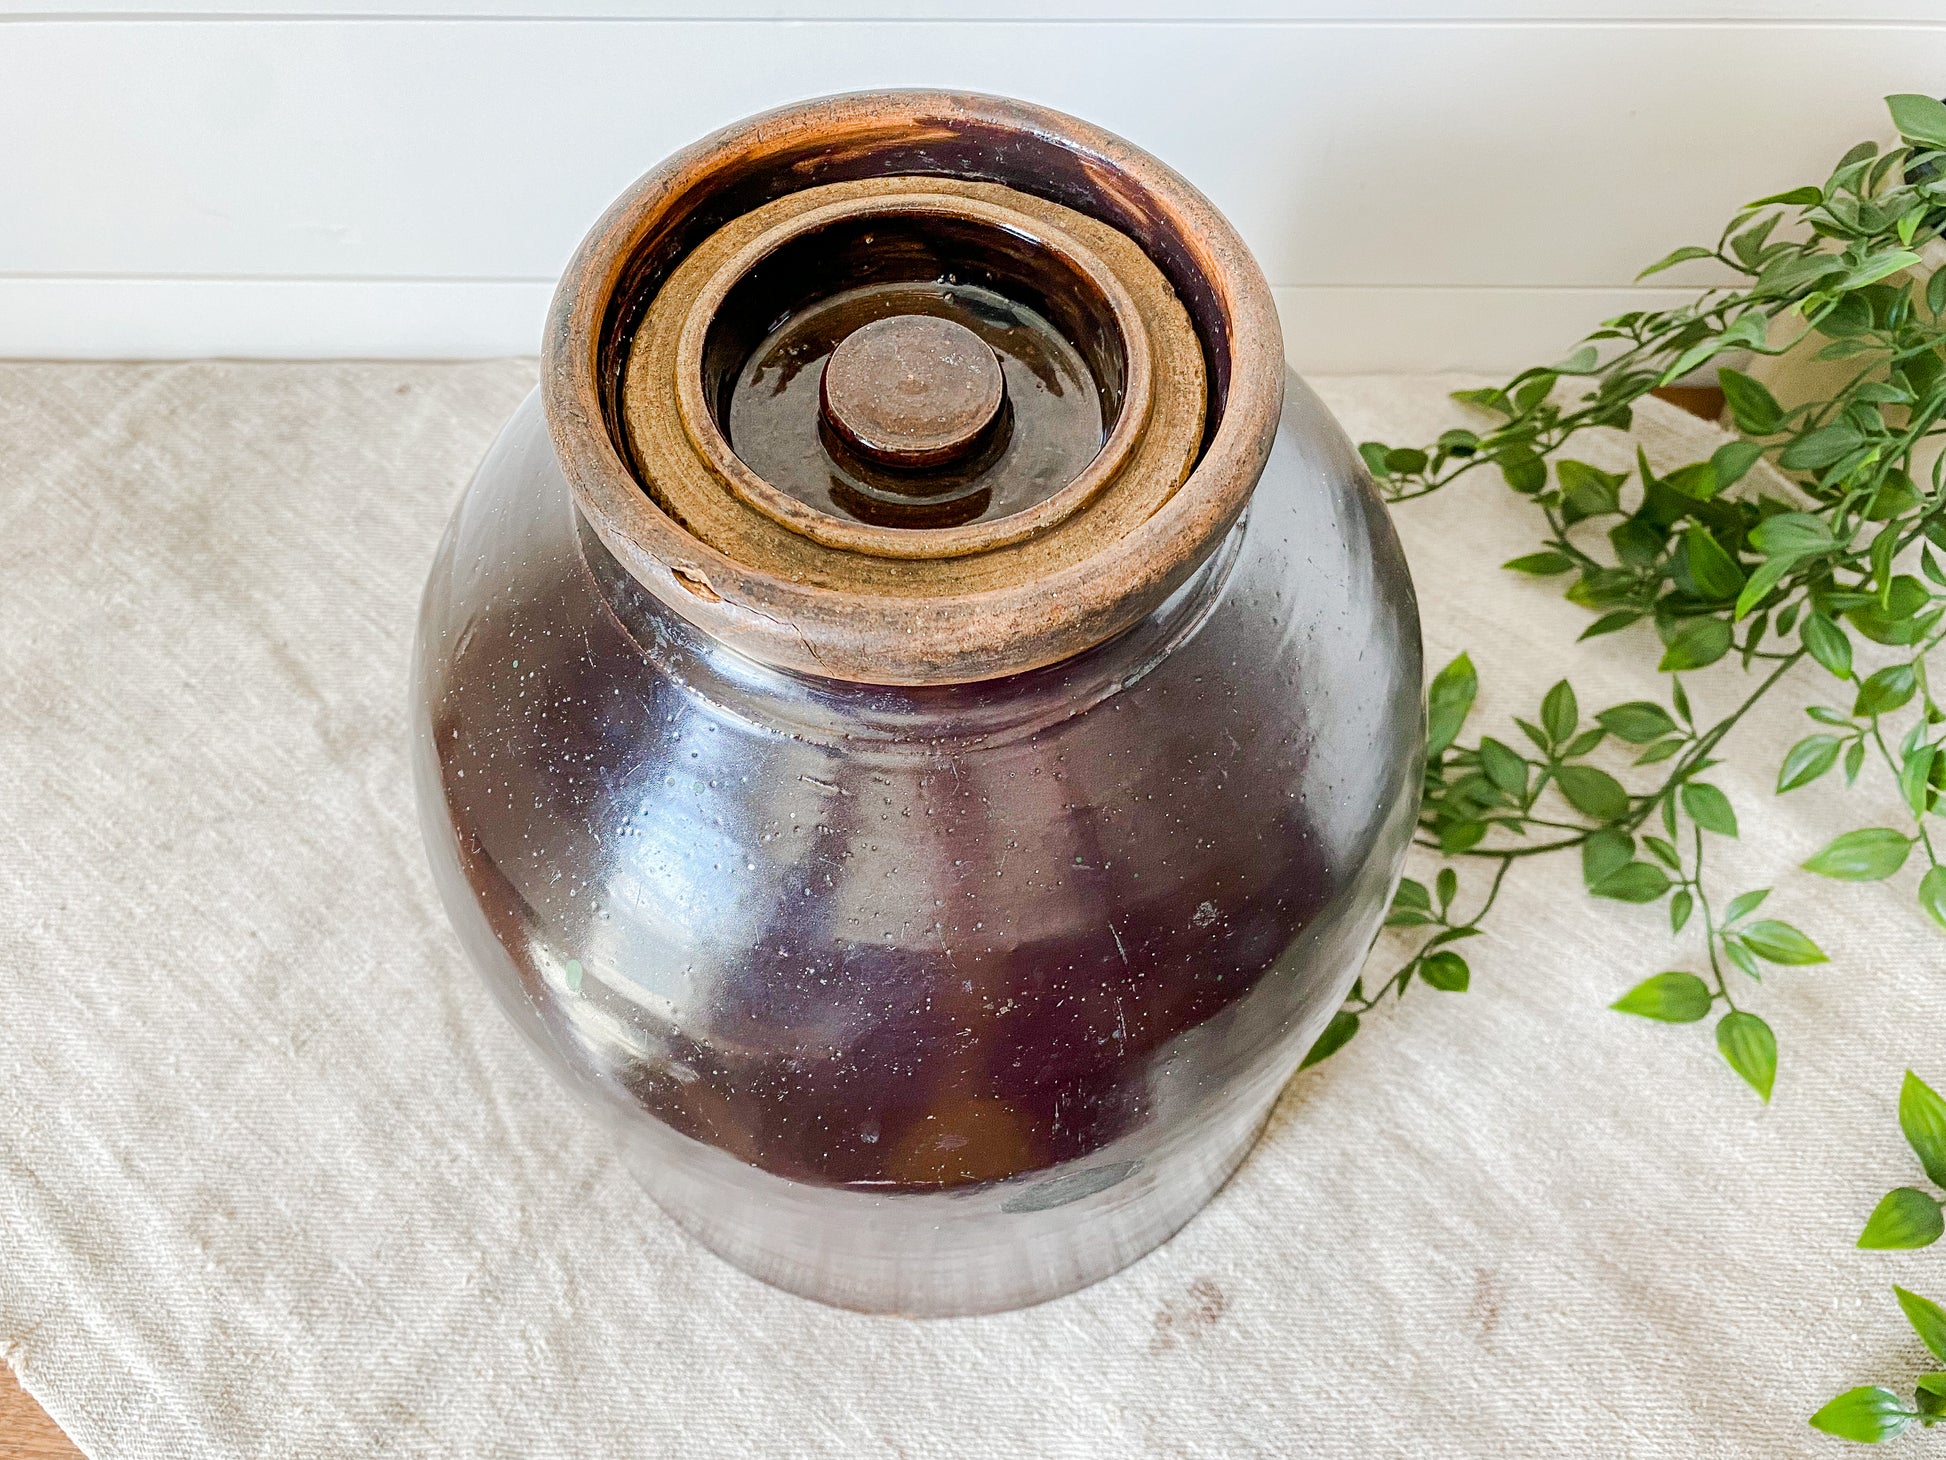 Rustic Fermenting Crock - Brown 3L or 4L with Weights - Stone